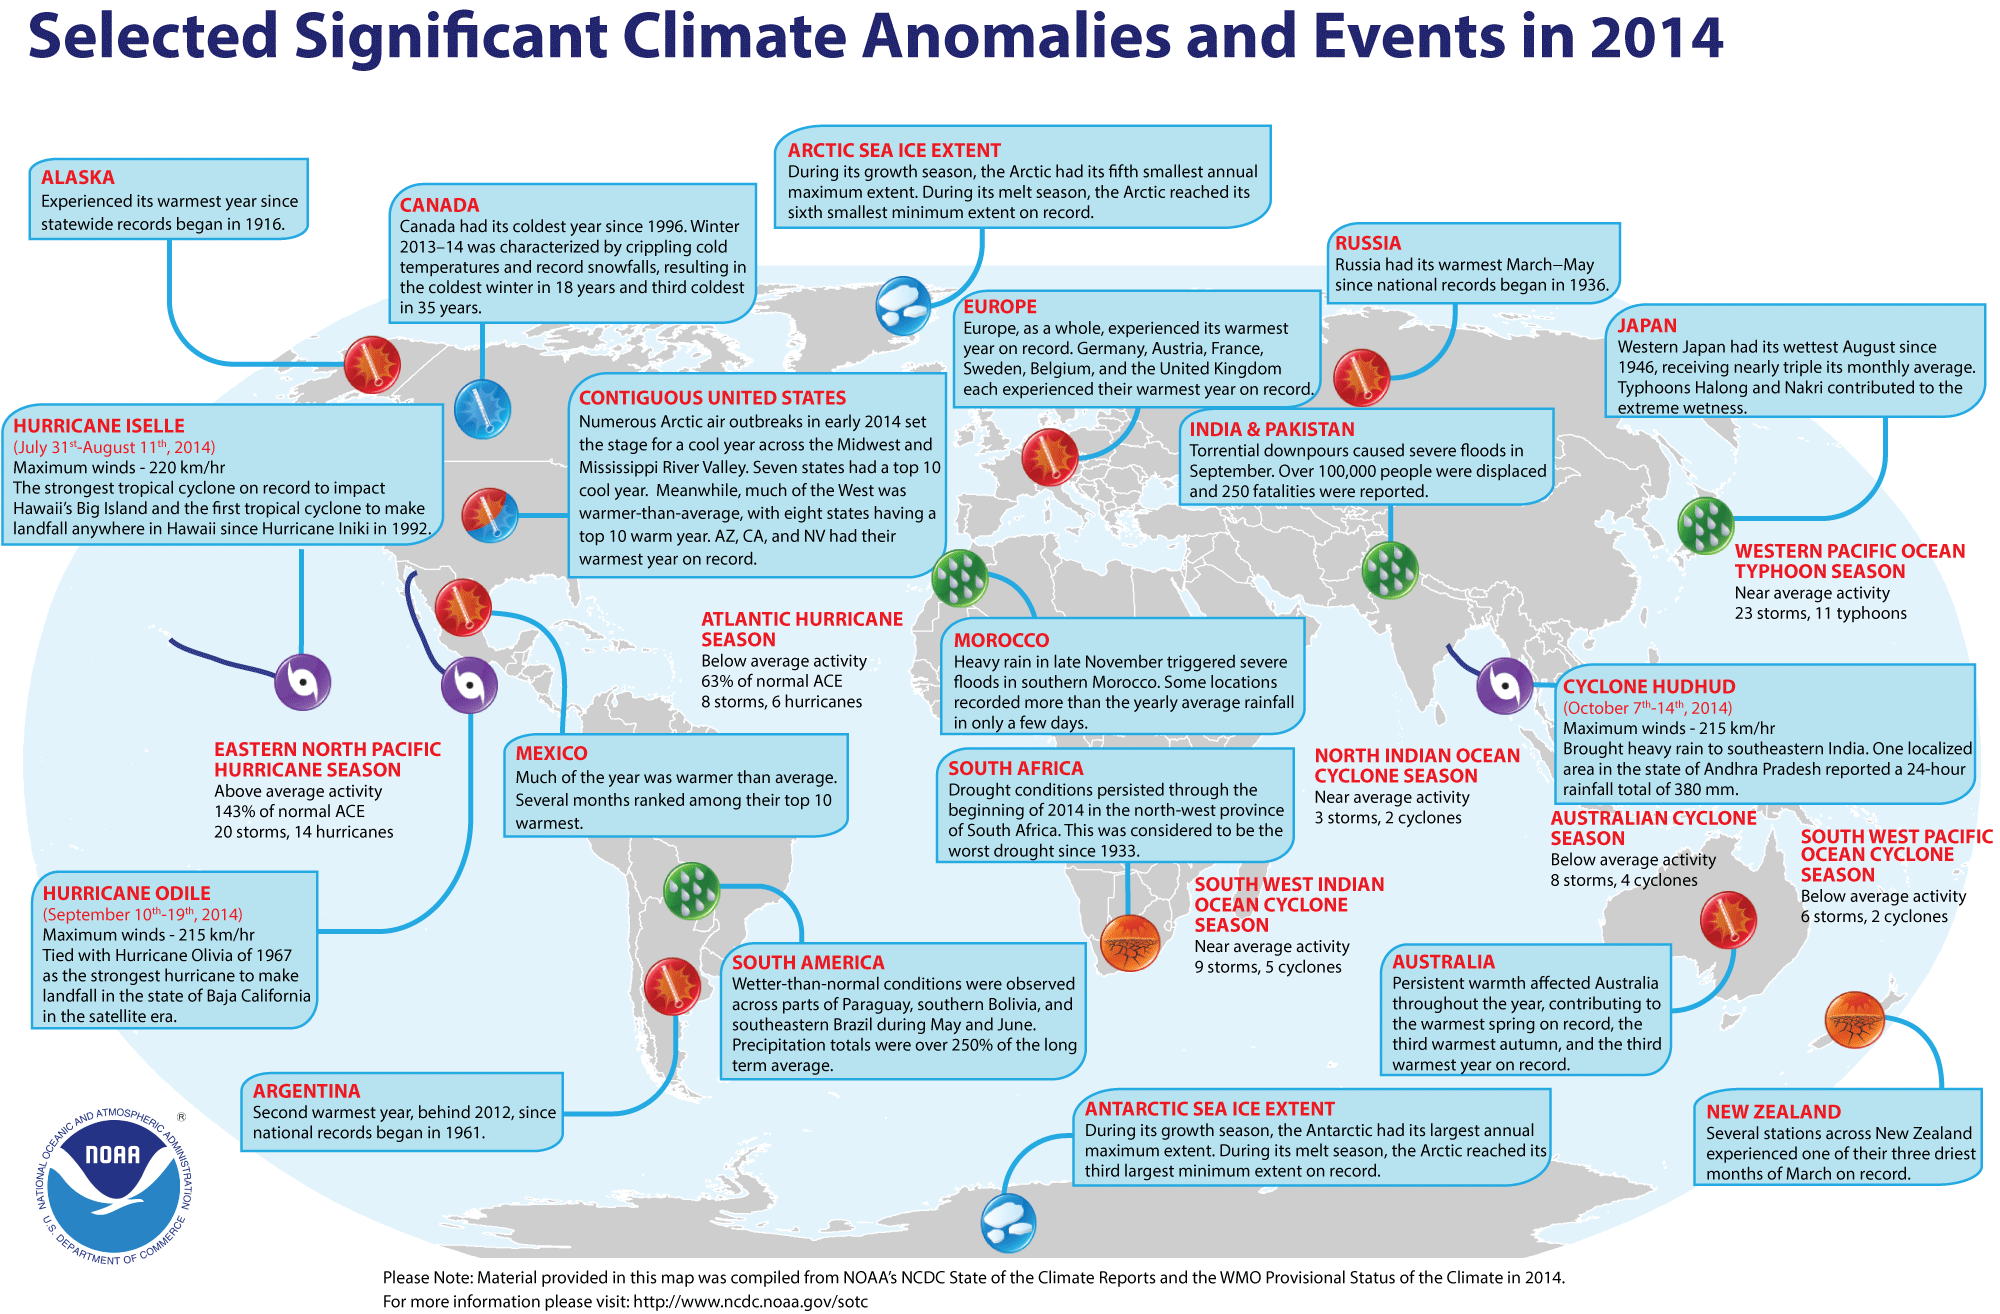 2014 Global Significant Weather and Climate Events